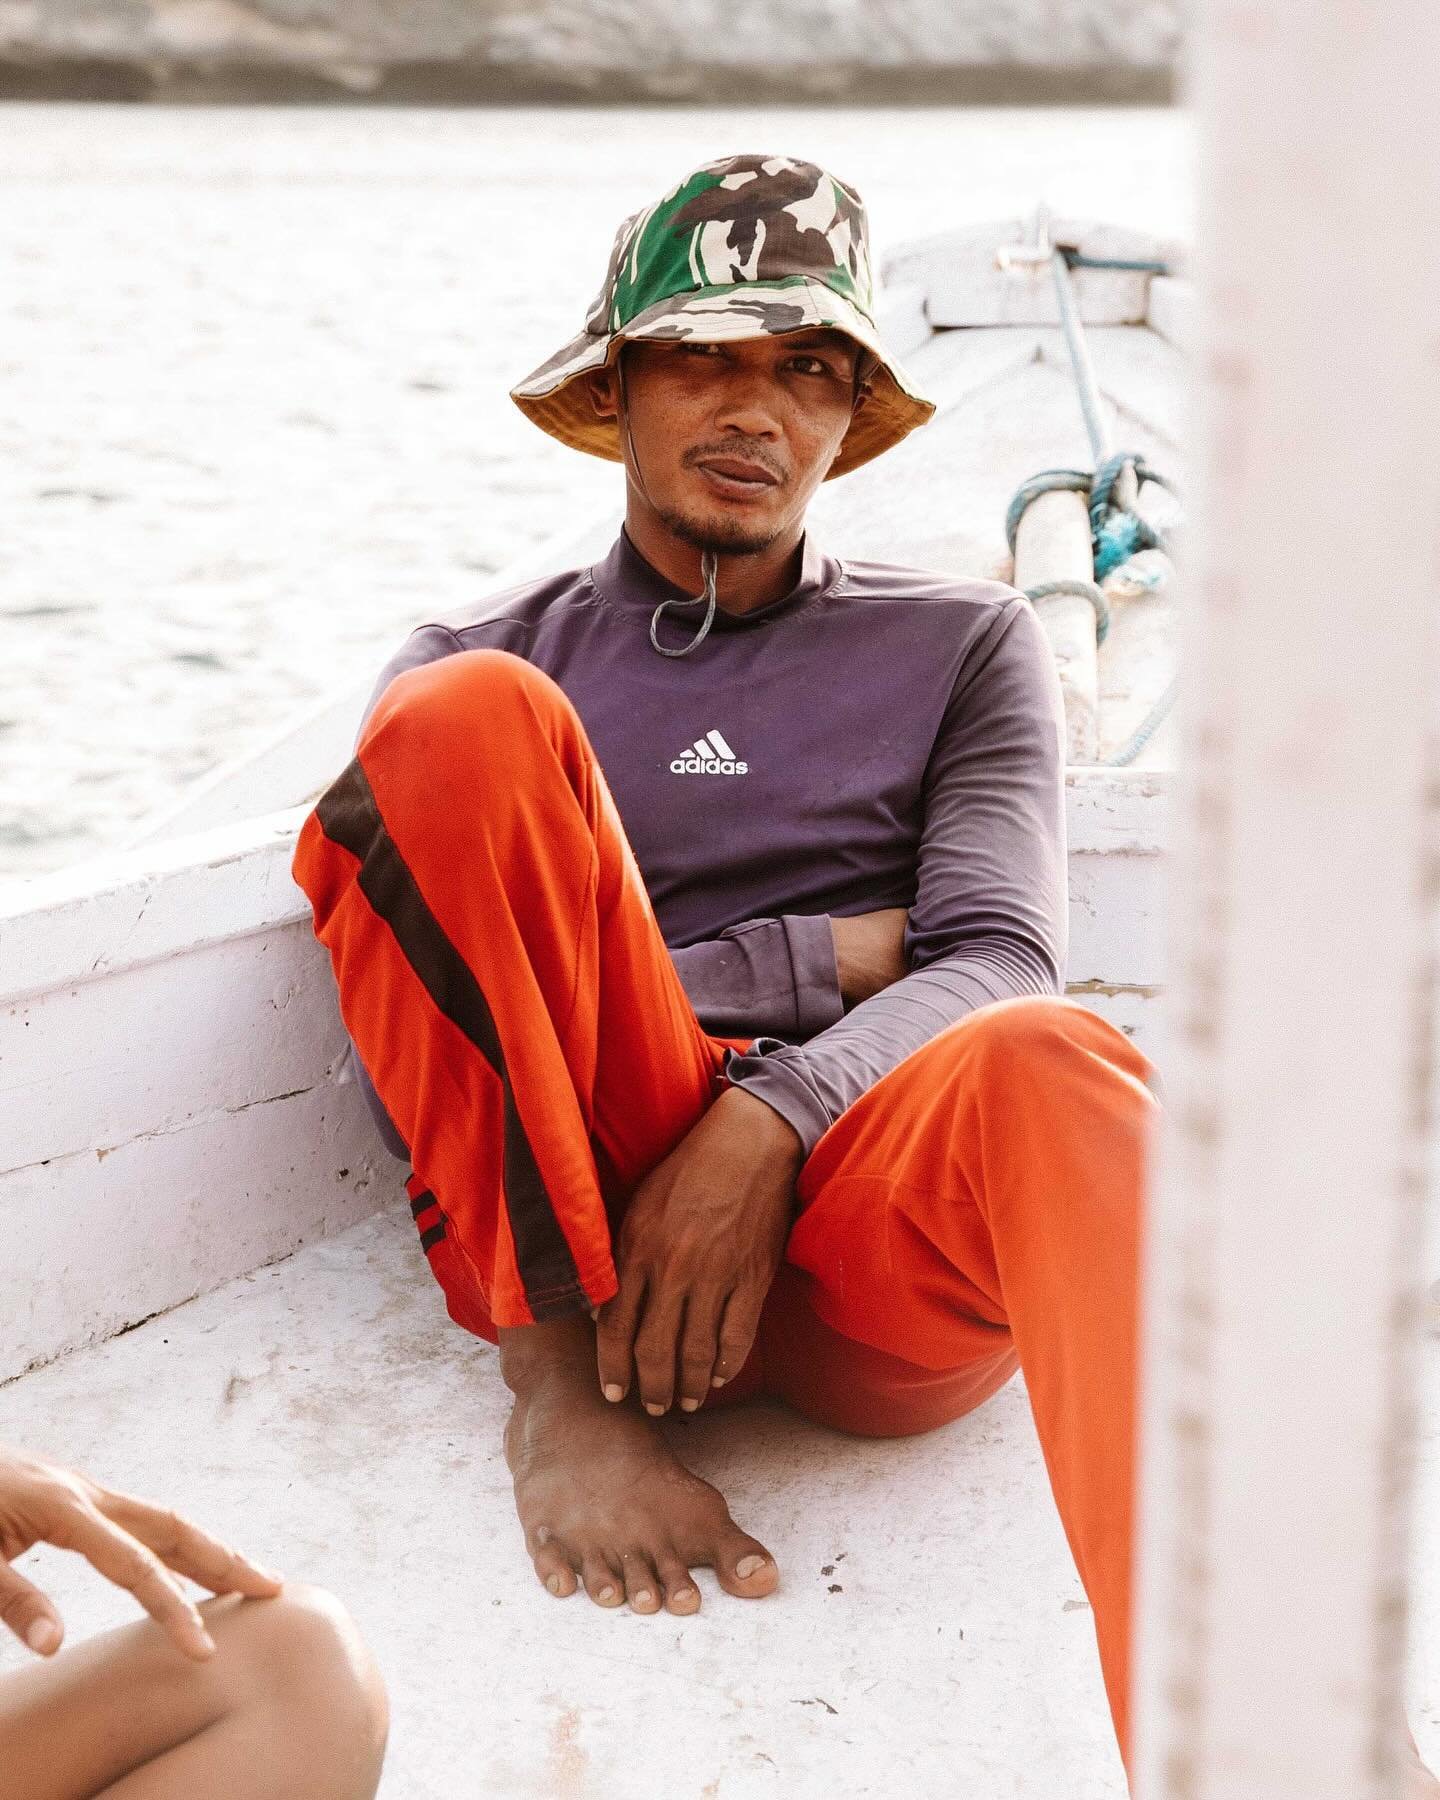 So you wanna work with shark fishermen?  Swipe right for the reality 😆